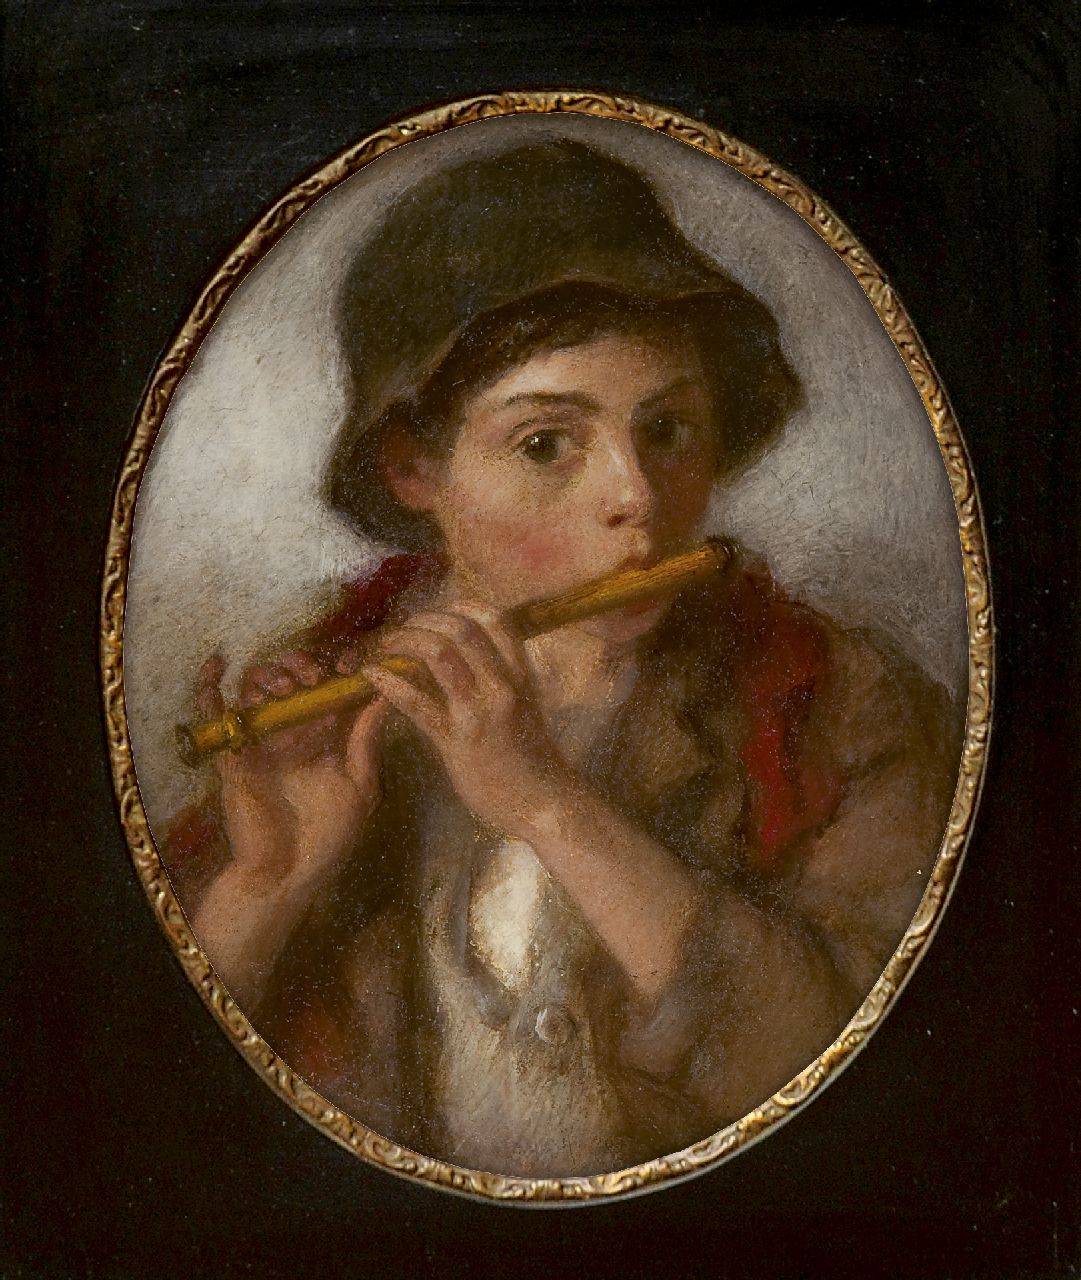 Broedelet A.V.L.  | 'André' Victor Leonard Broedelet, A young shepherd with flute, oil on eternite 23.0 x 18.0 cm, signed l.r. with monogram